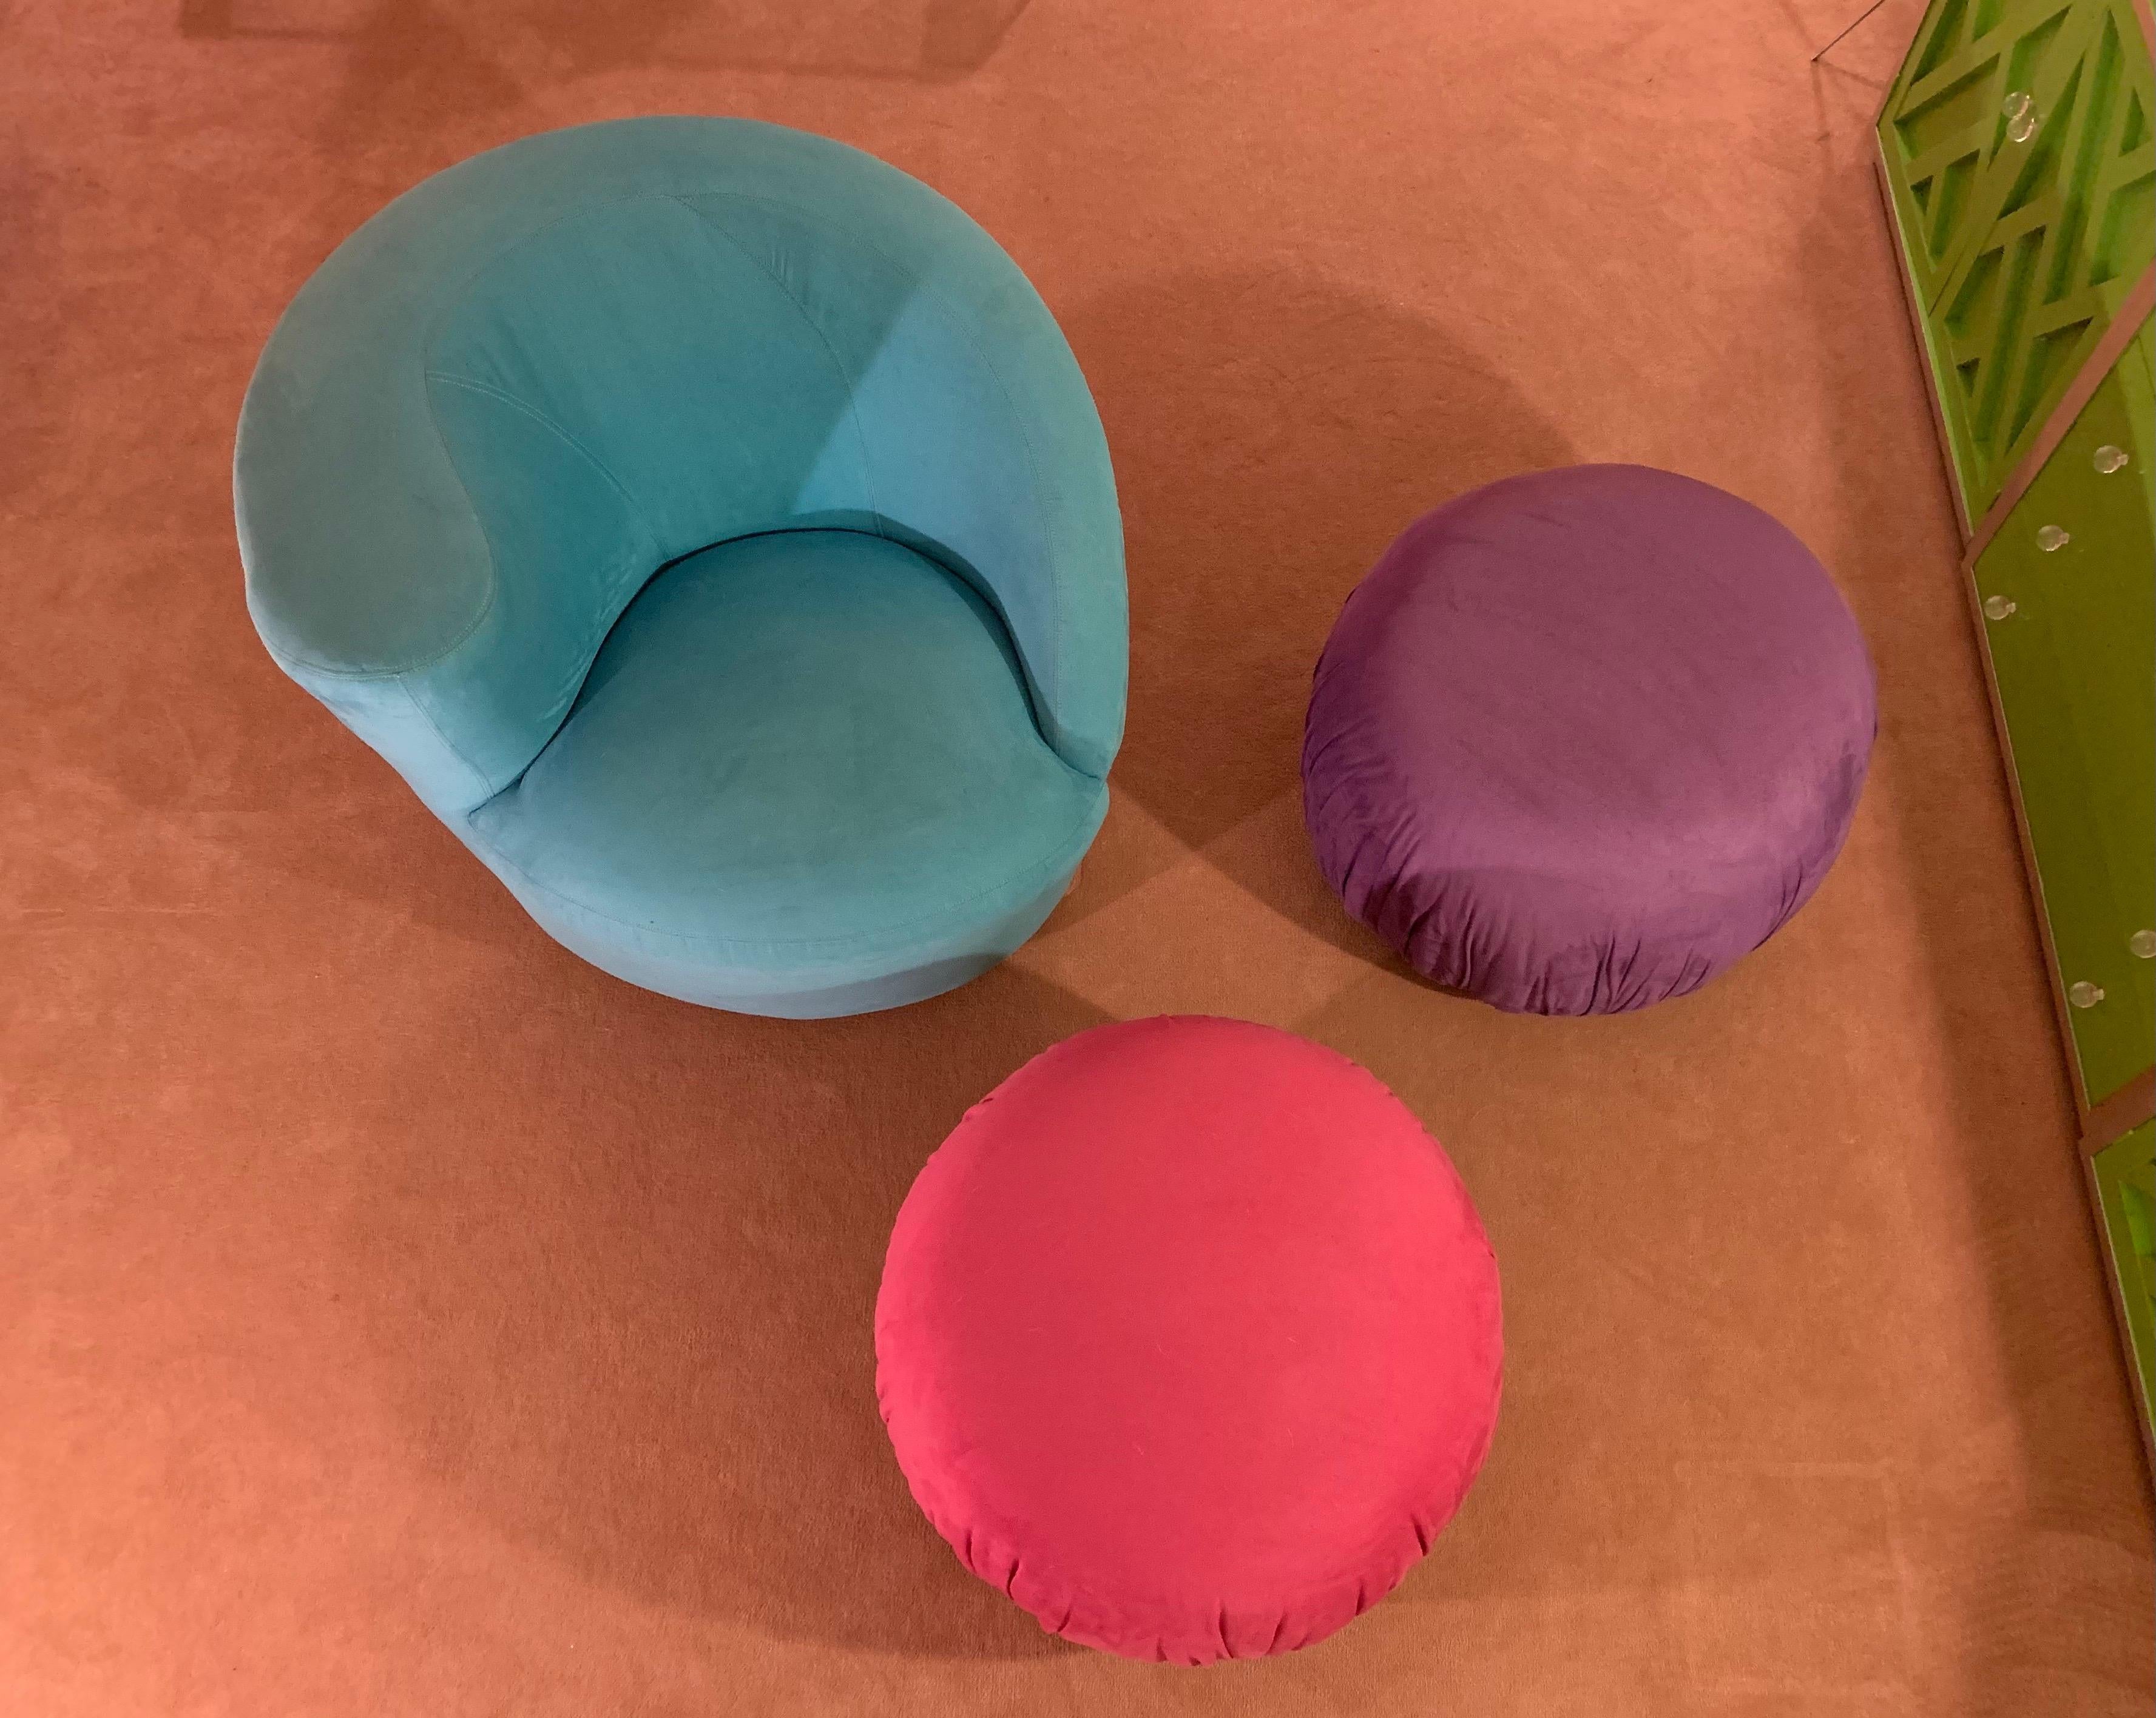 Wonderfully fun round ottomans in bright candy-colored ultra-suede.

Lightweight enough to move easily, making these a clever ancillary seating option

Directional tags on base. 

